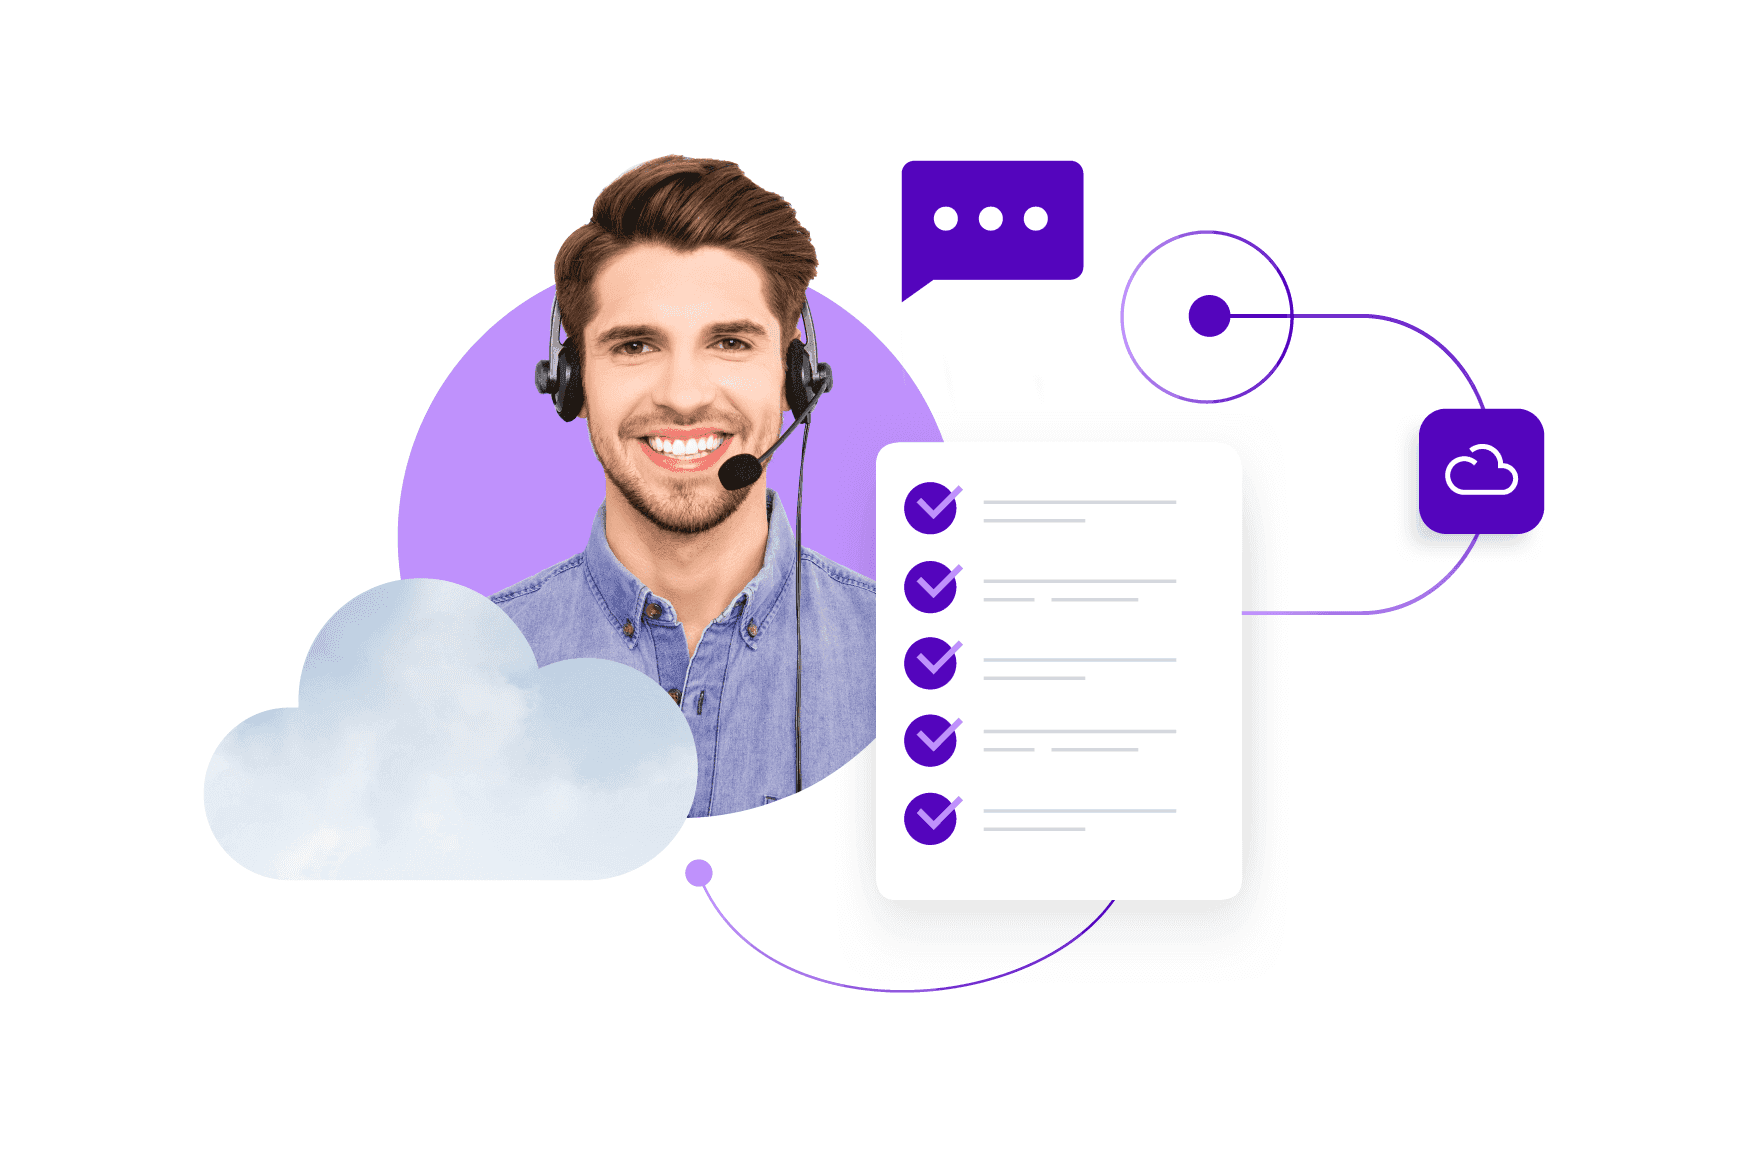 Adopt Six Best Practices To Successfully Implement A Cloud Contact Center Solution